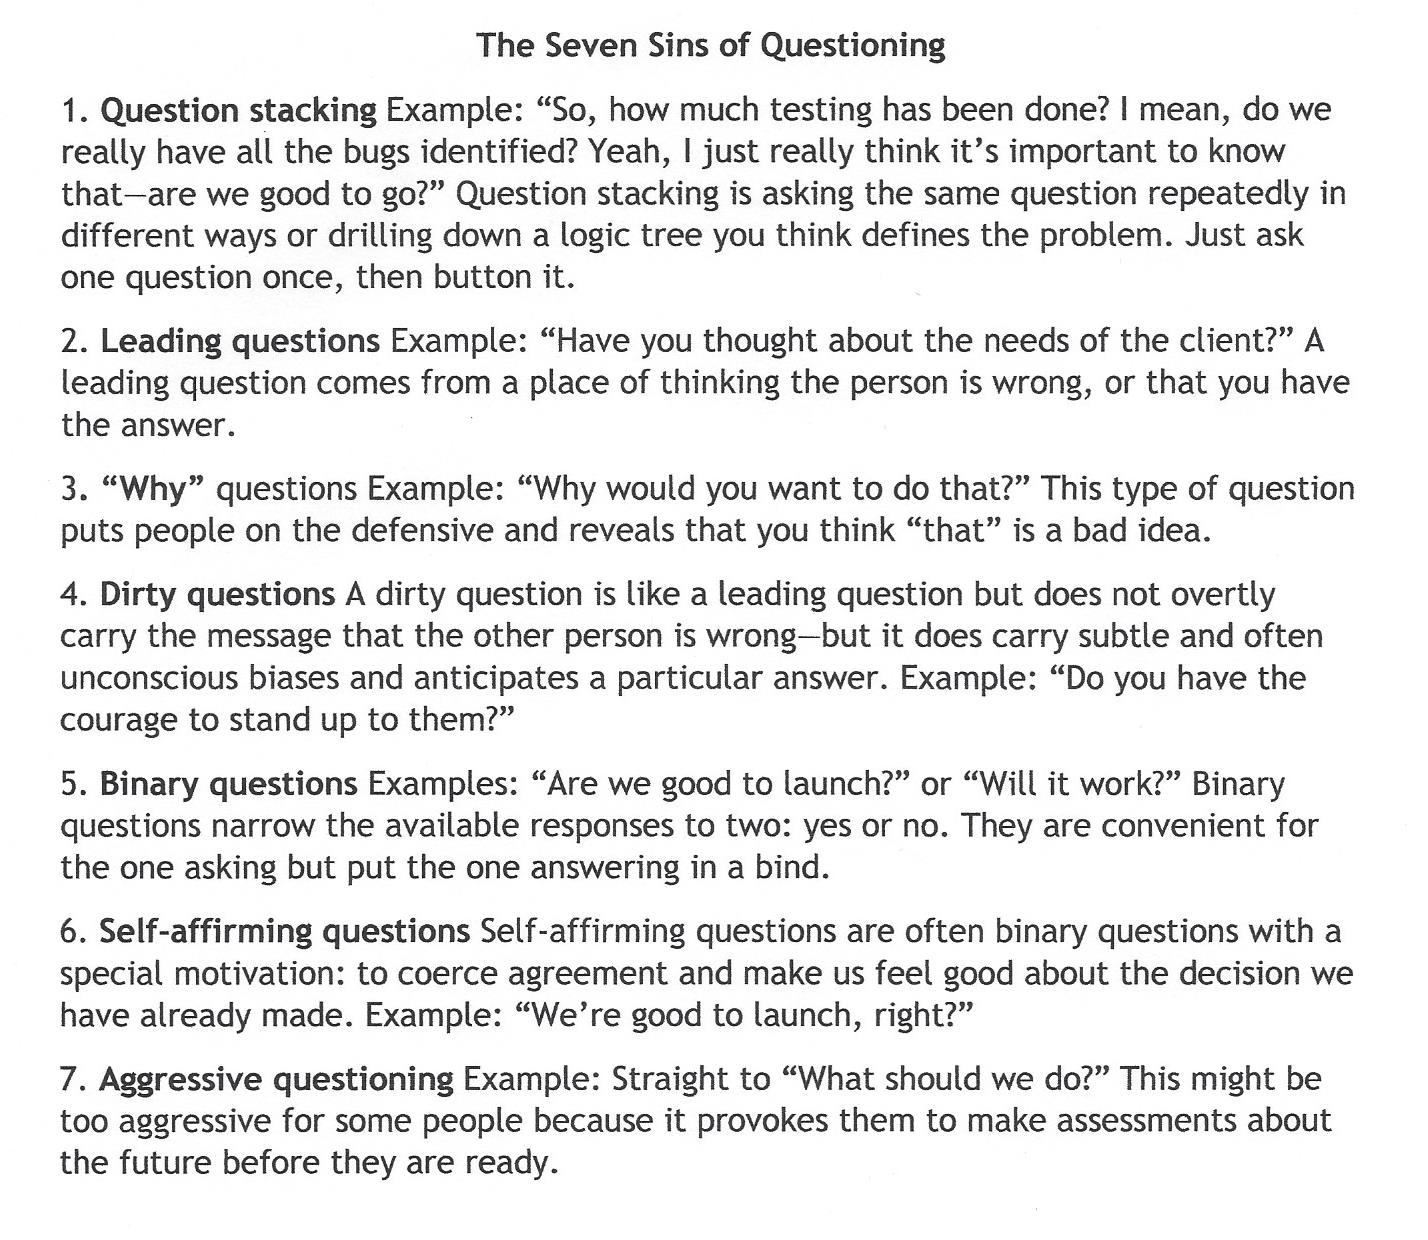 The Seven Sins of Questioning